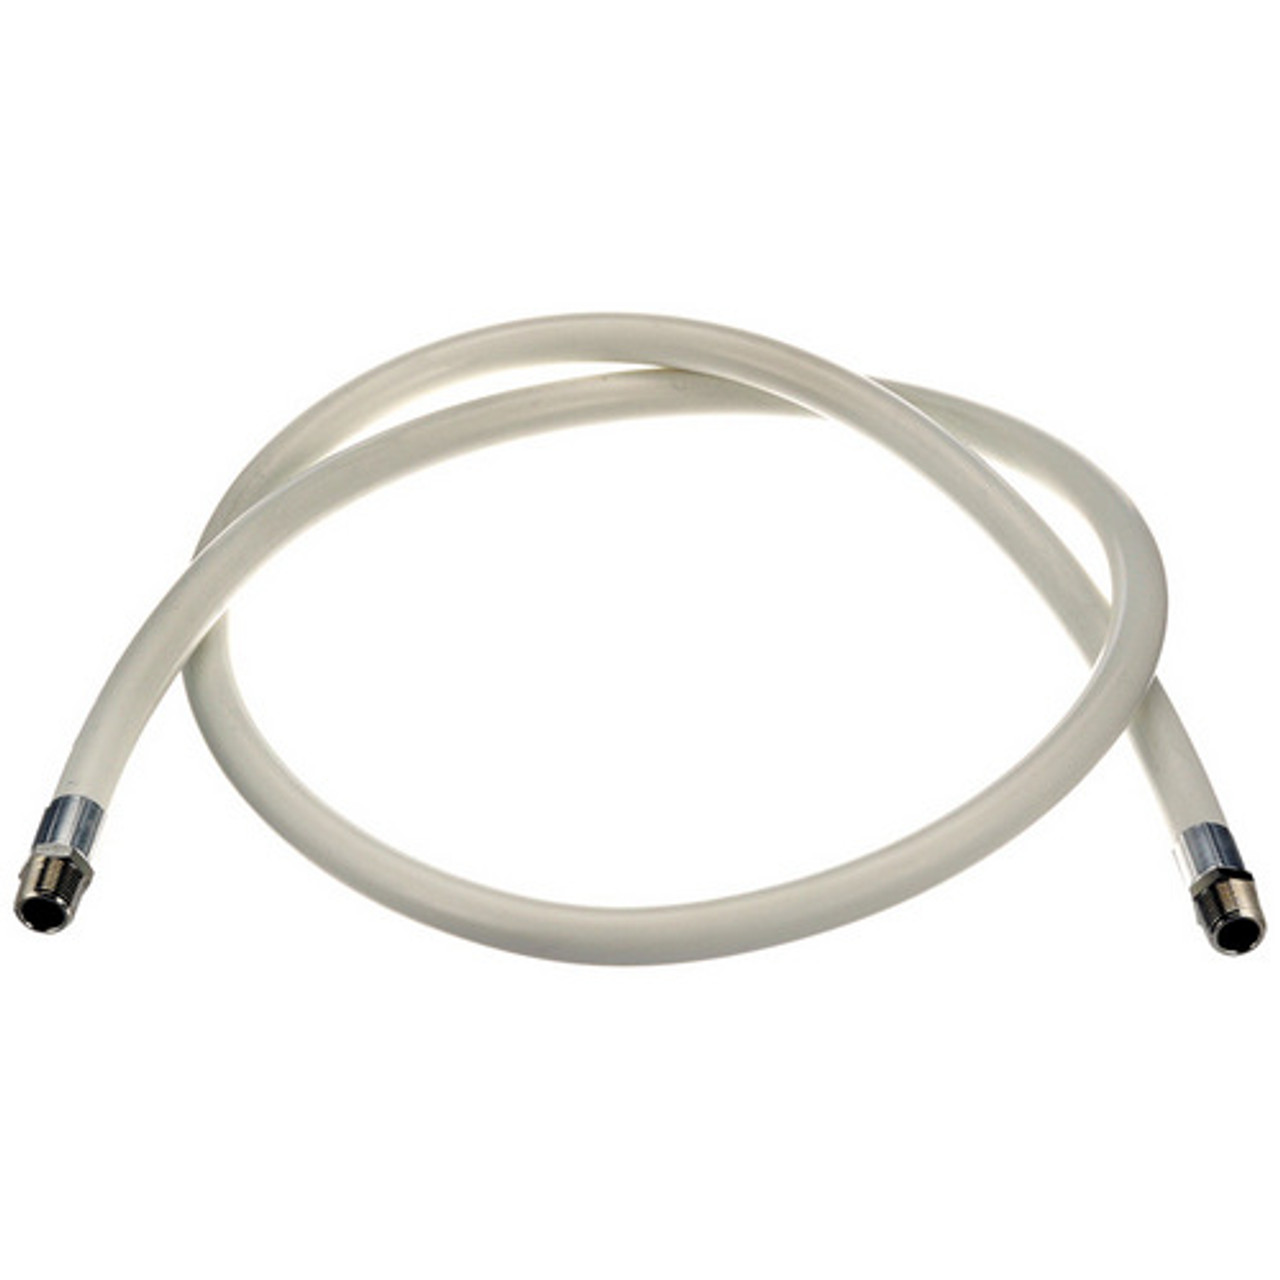 Filter Hose - Replacement Part For Hunter HF05003